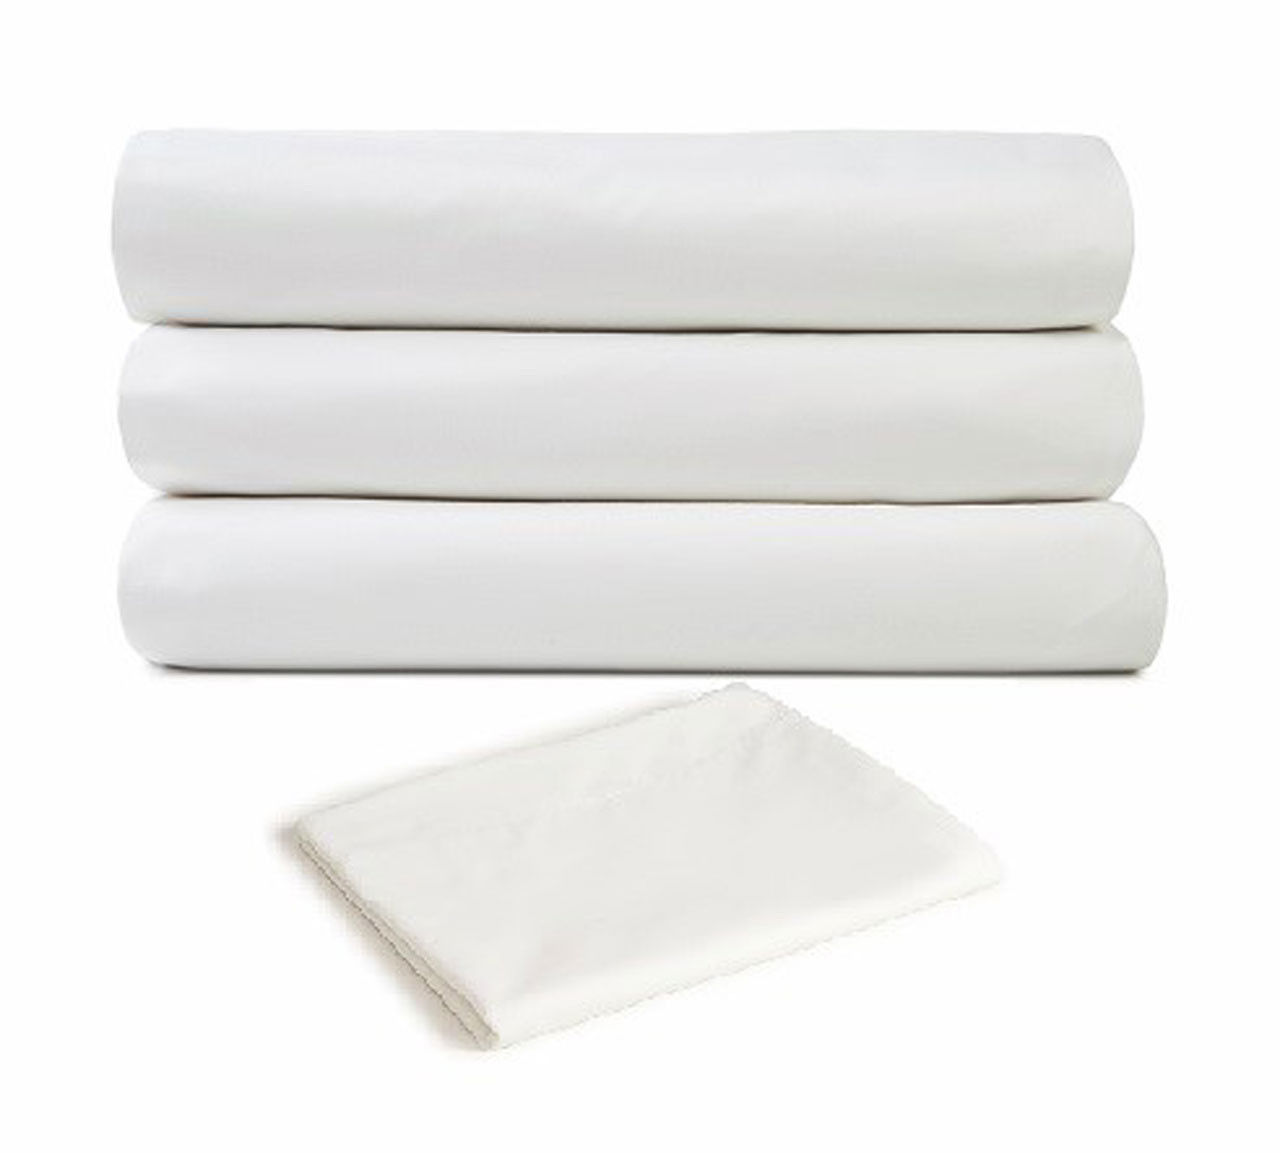 Do the T310 cotton and polyester blend sheets have deep pockets?